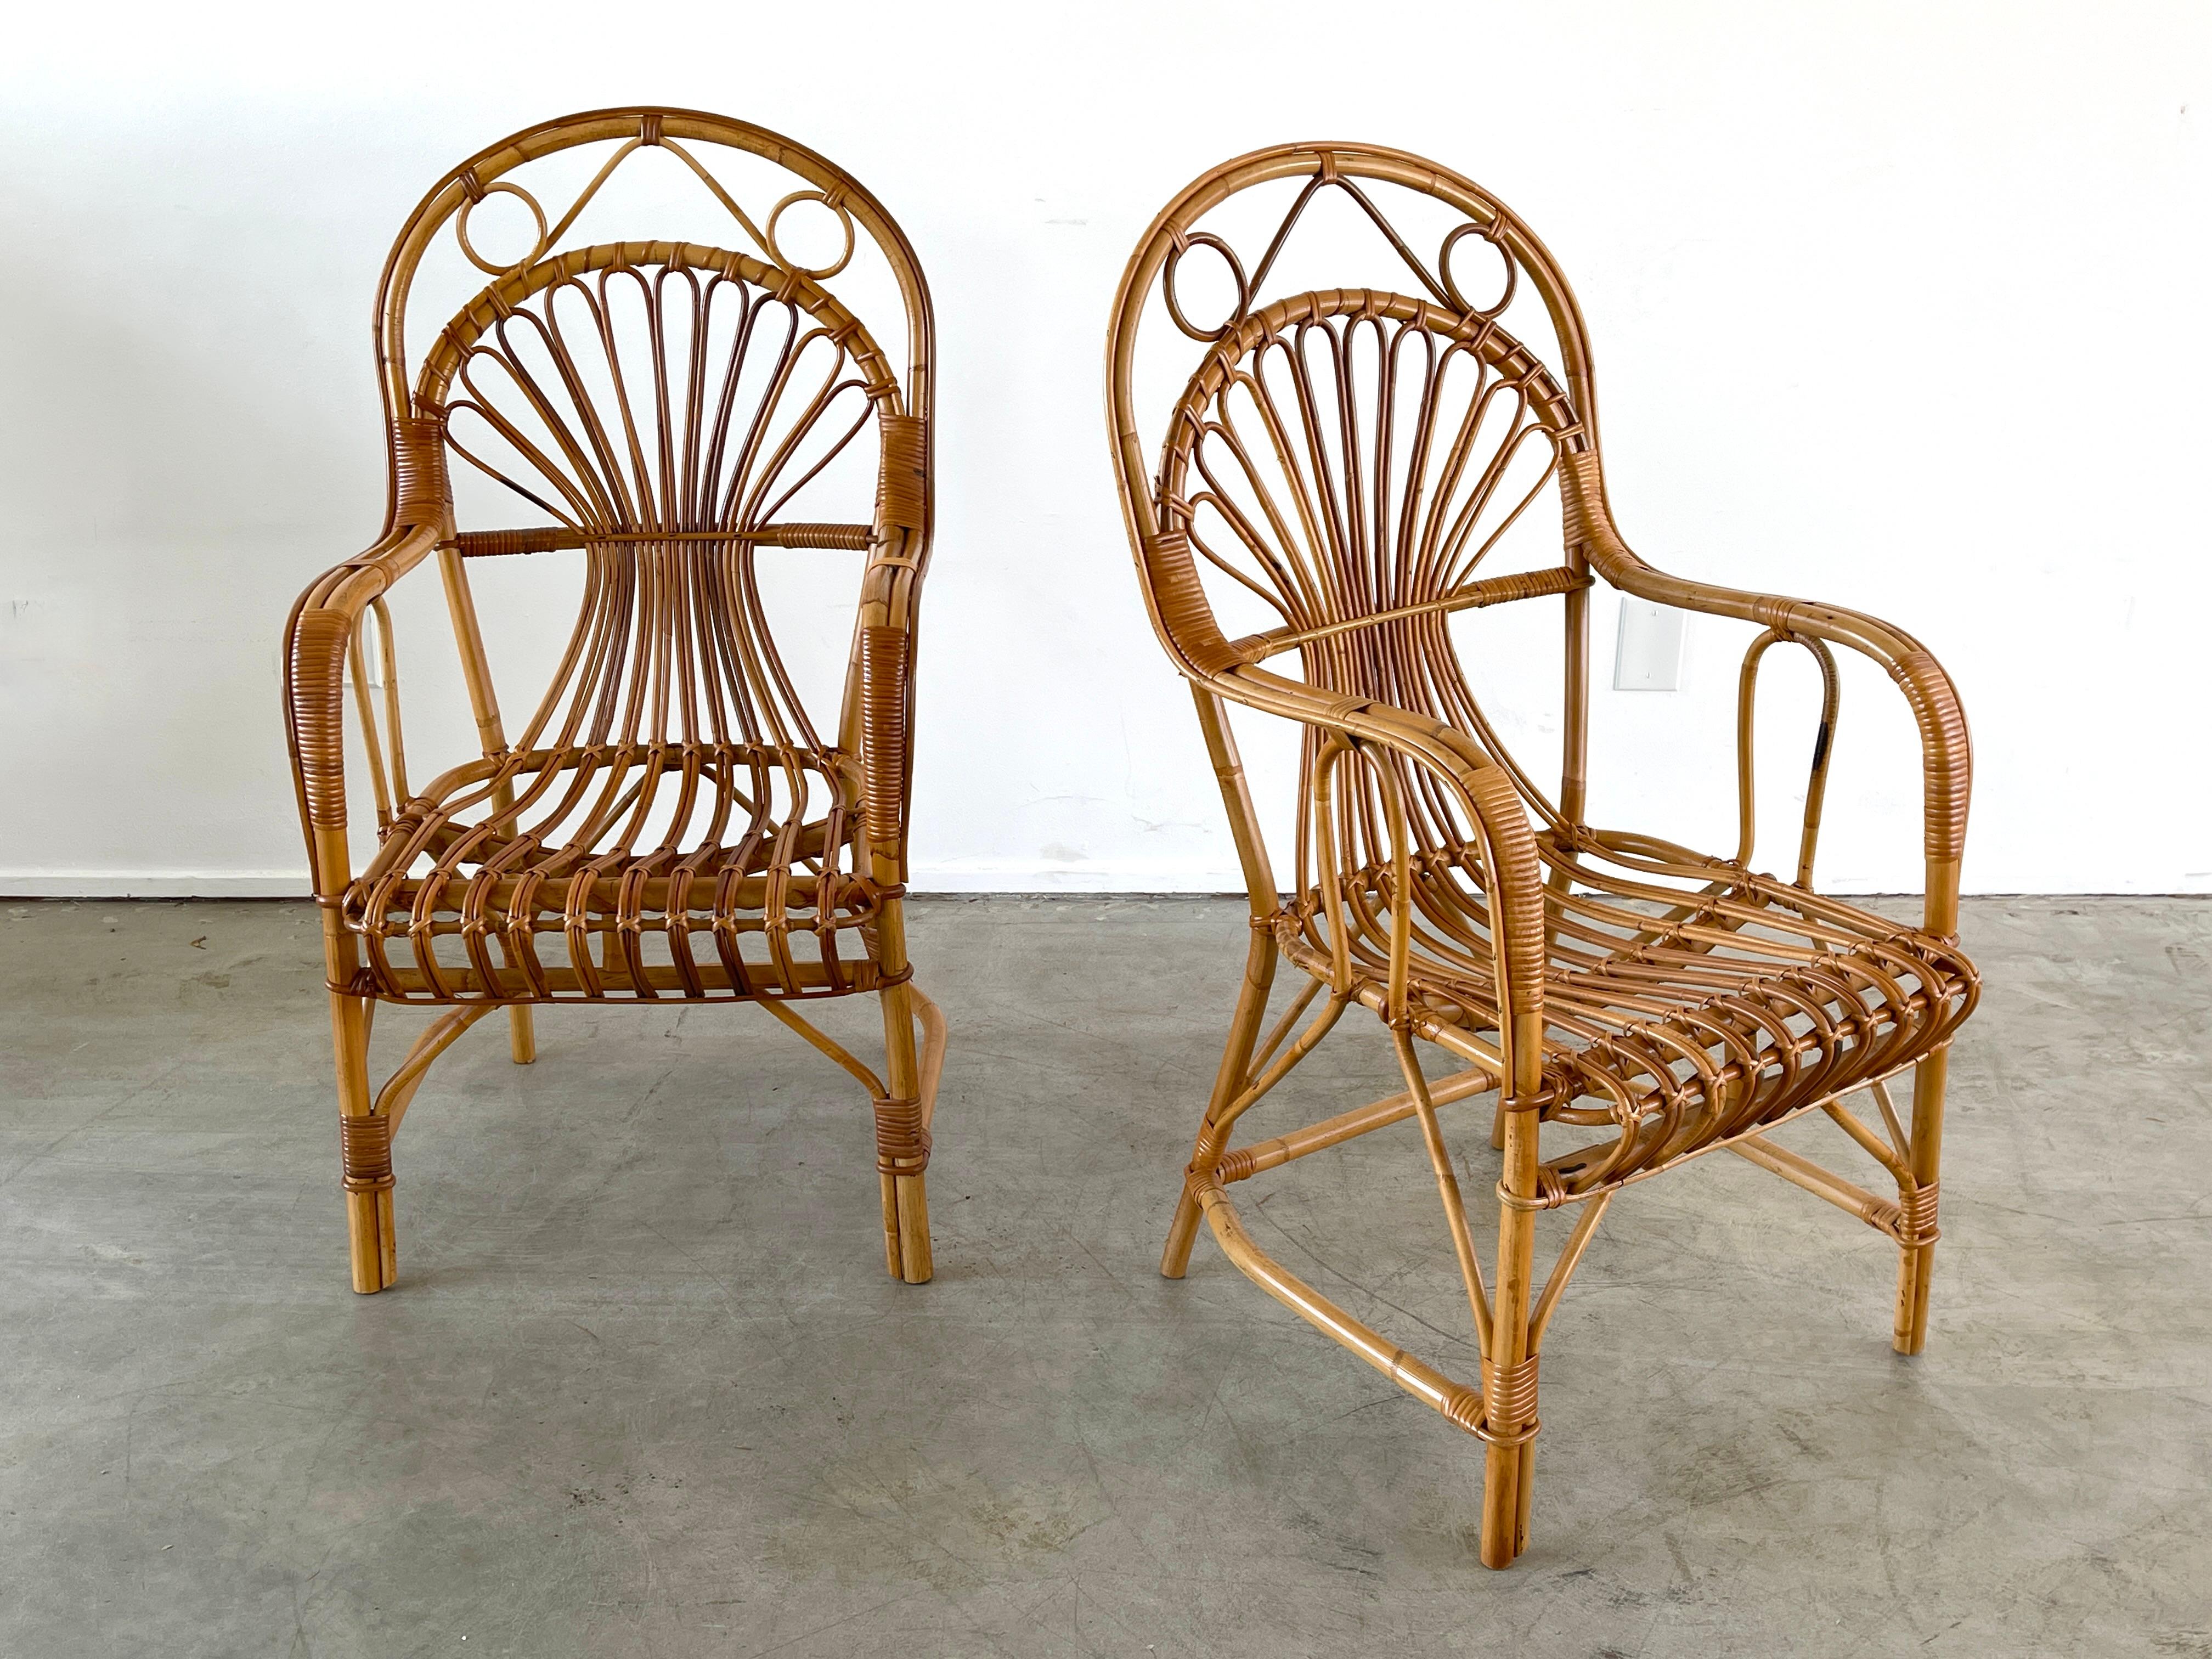 Whimsical pair of Italian bamboo chairs with curved backs and incredible detailing.
      